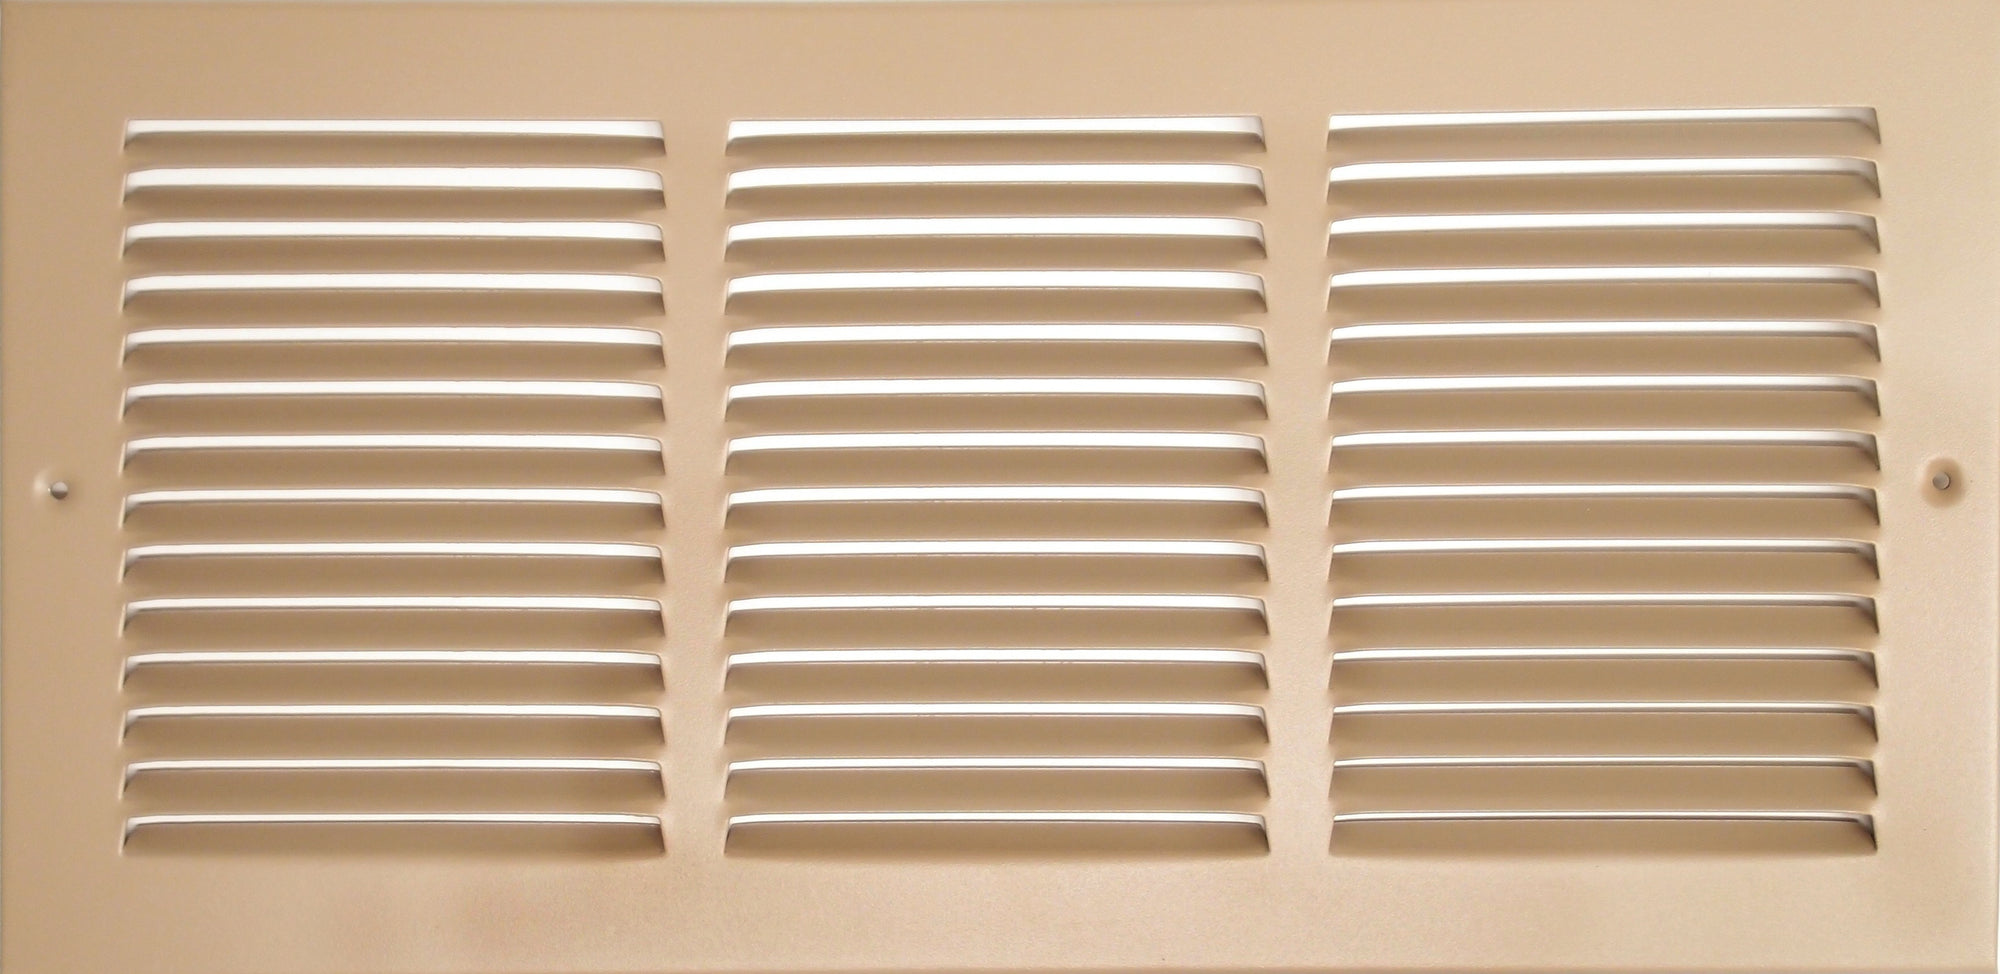 30" X 8" Air Vent Return Grilles - Sidewall and Ceiling - Steel